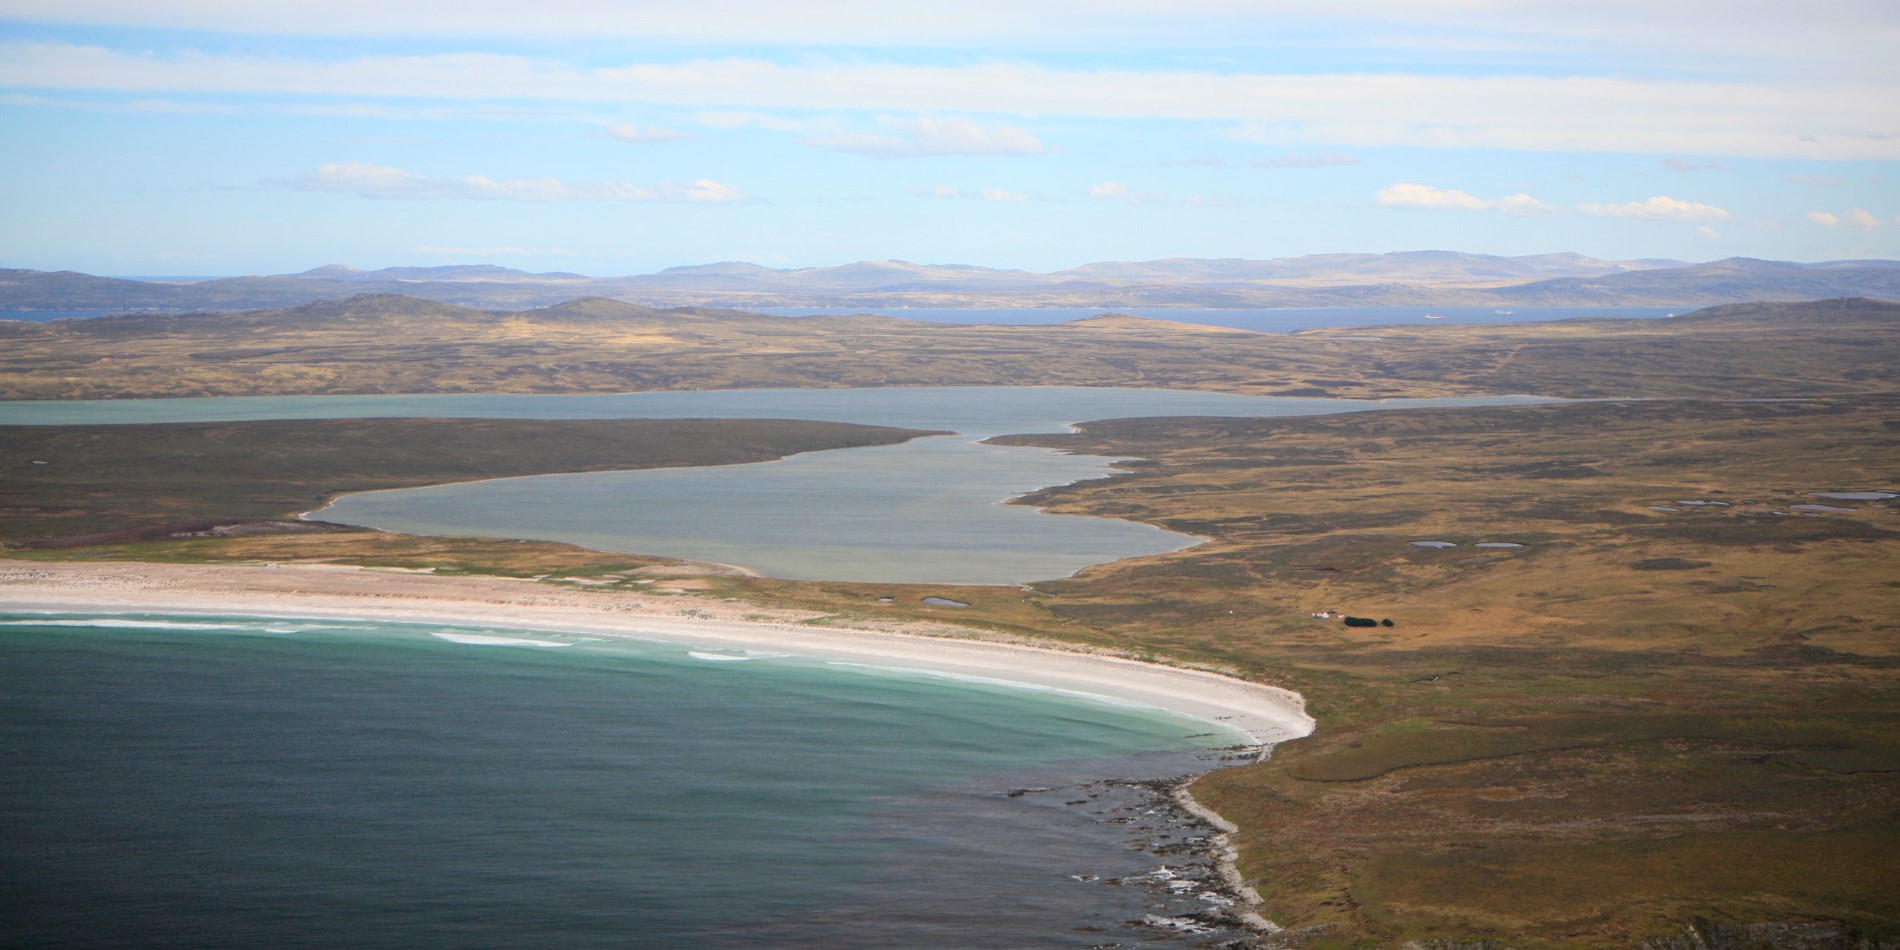 Aerial view of the Falkland islands.